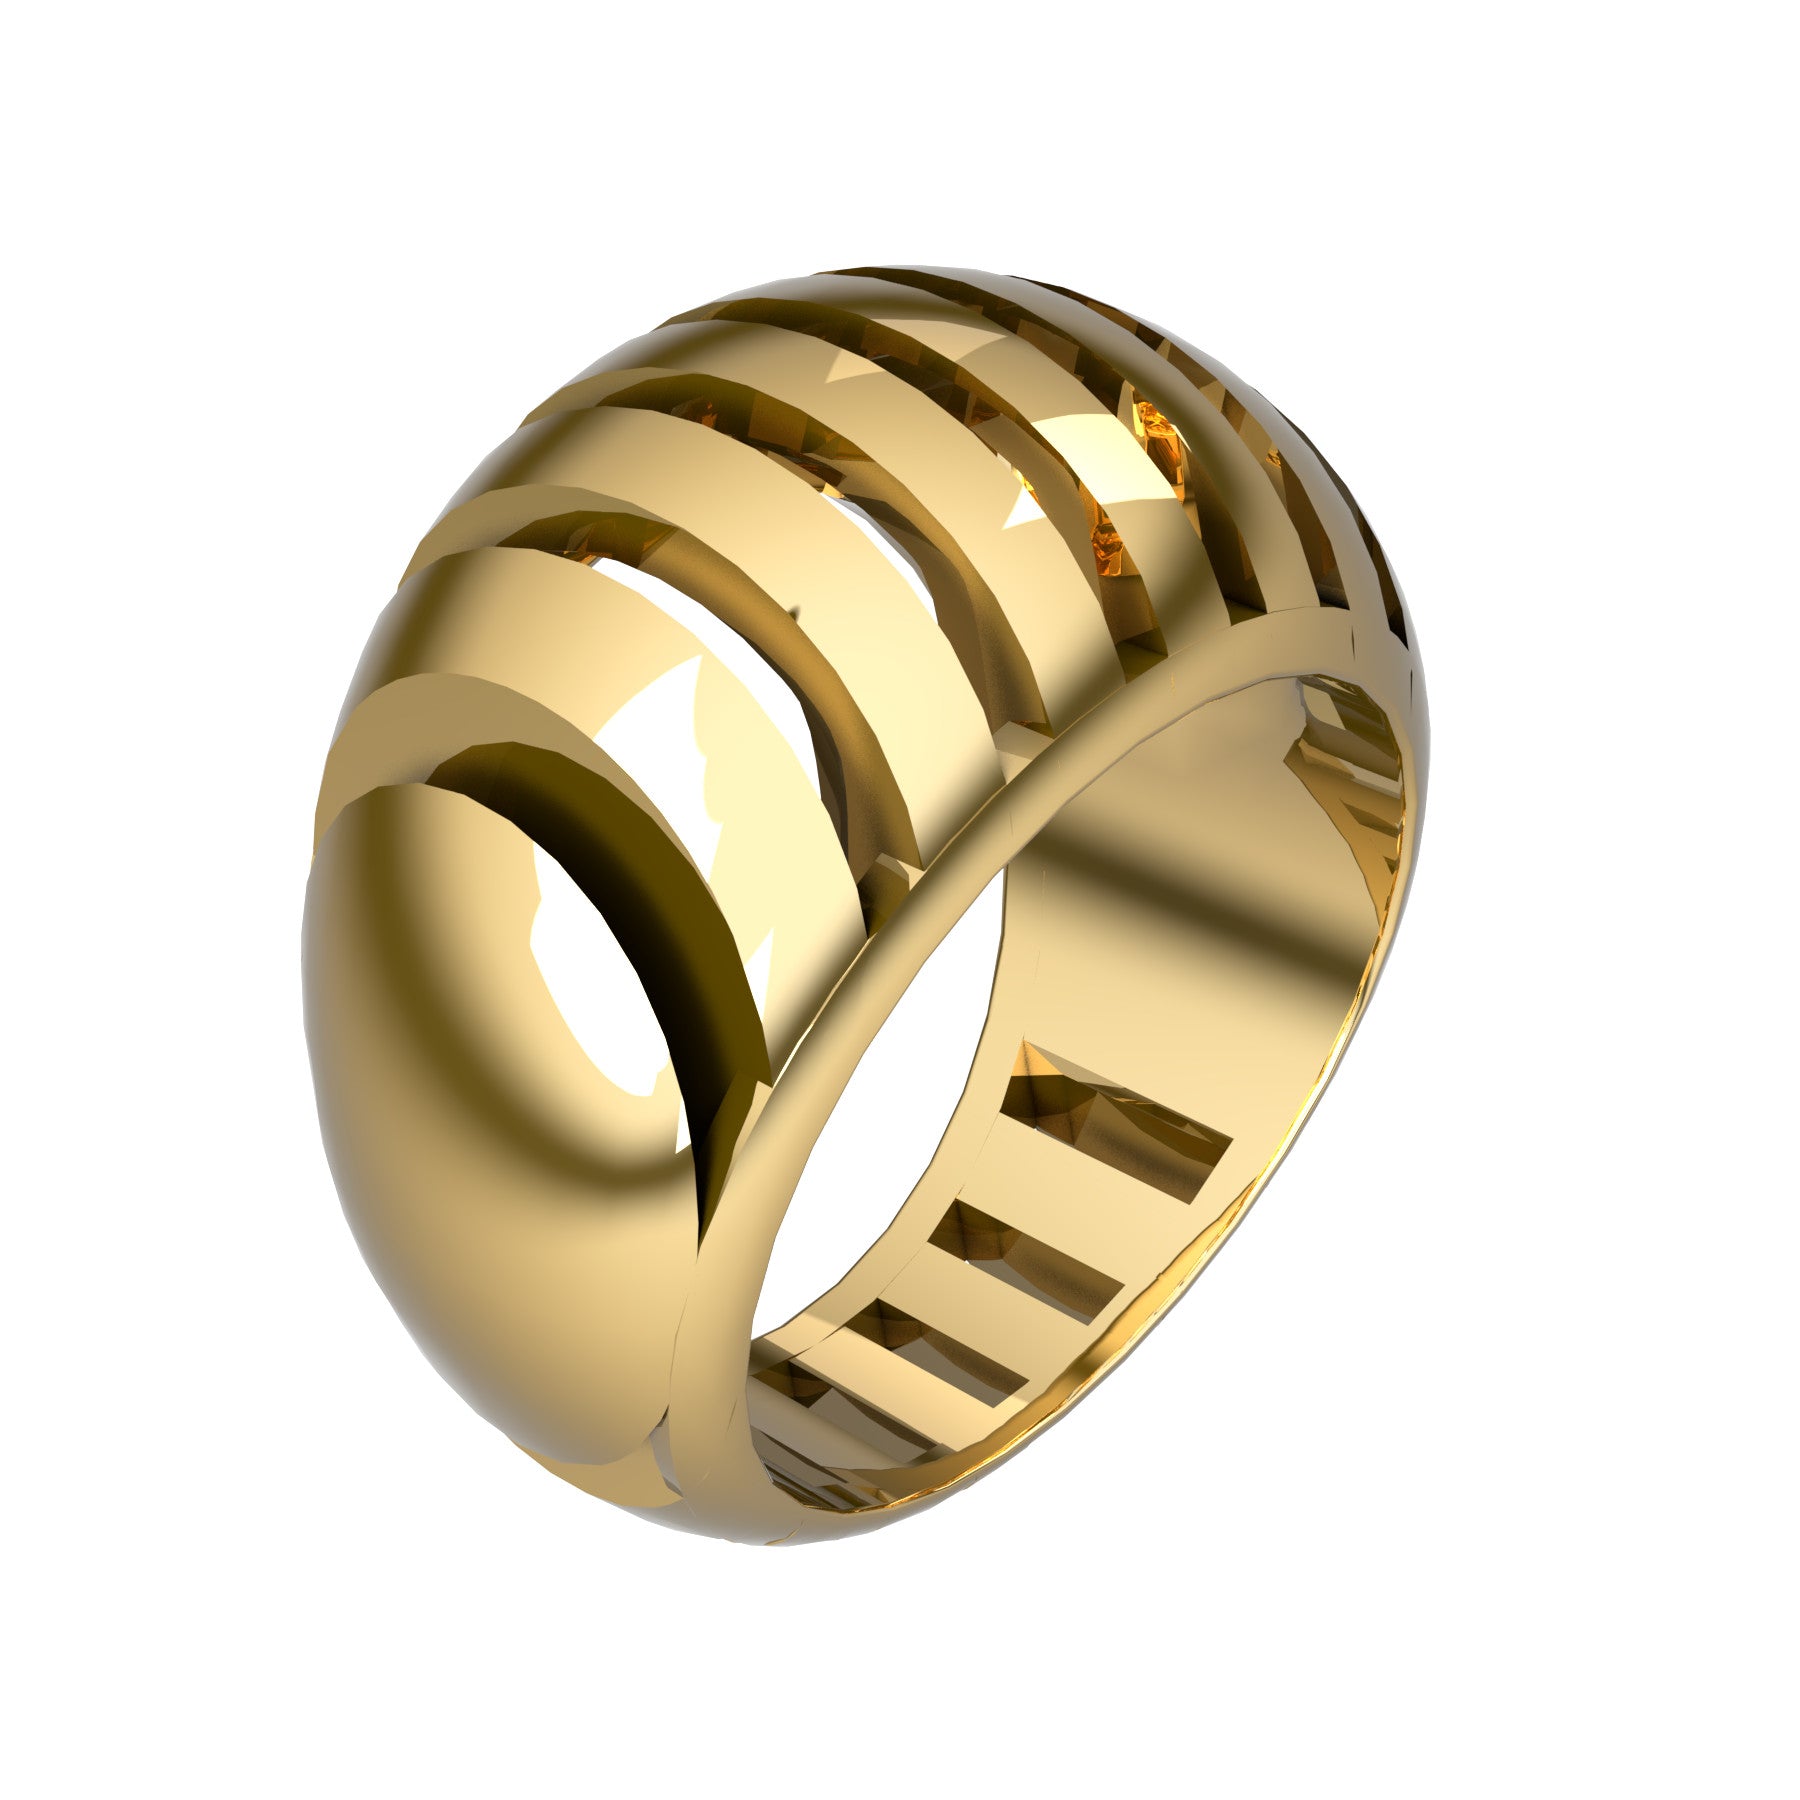 split 4 ring, 18 K yellow gold, weight about 11,0 g. (0,39 oz), width 14,0 mm max